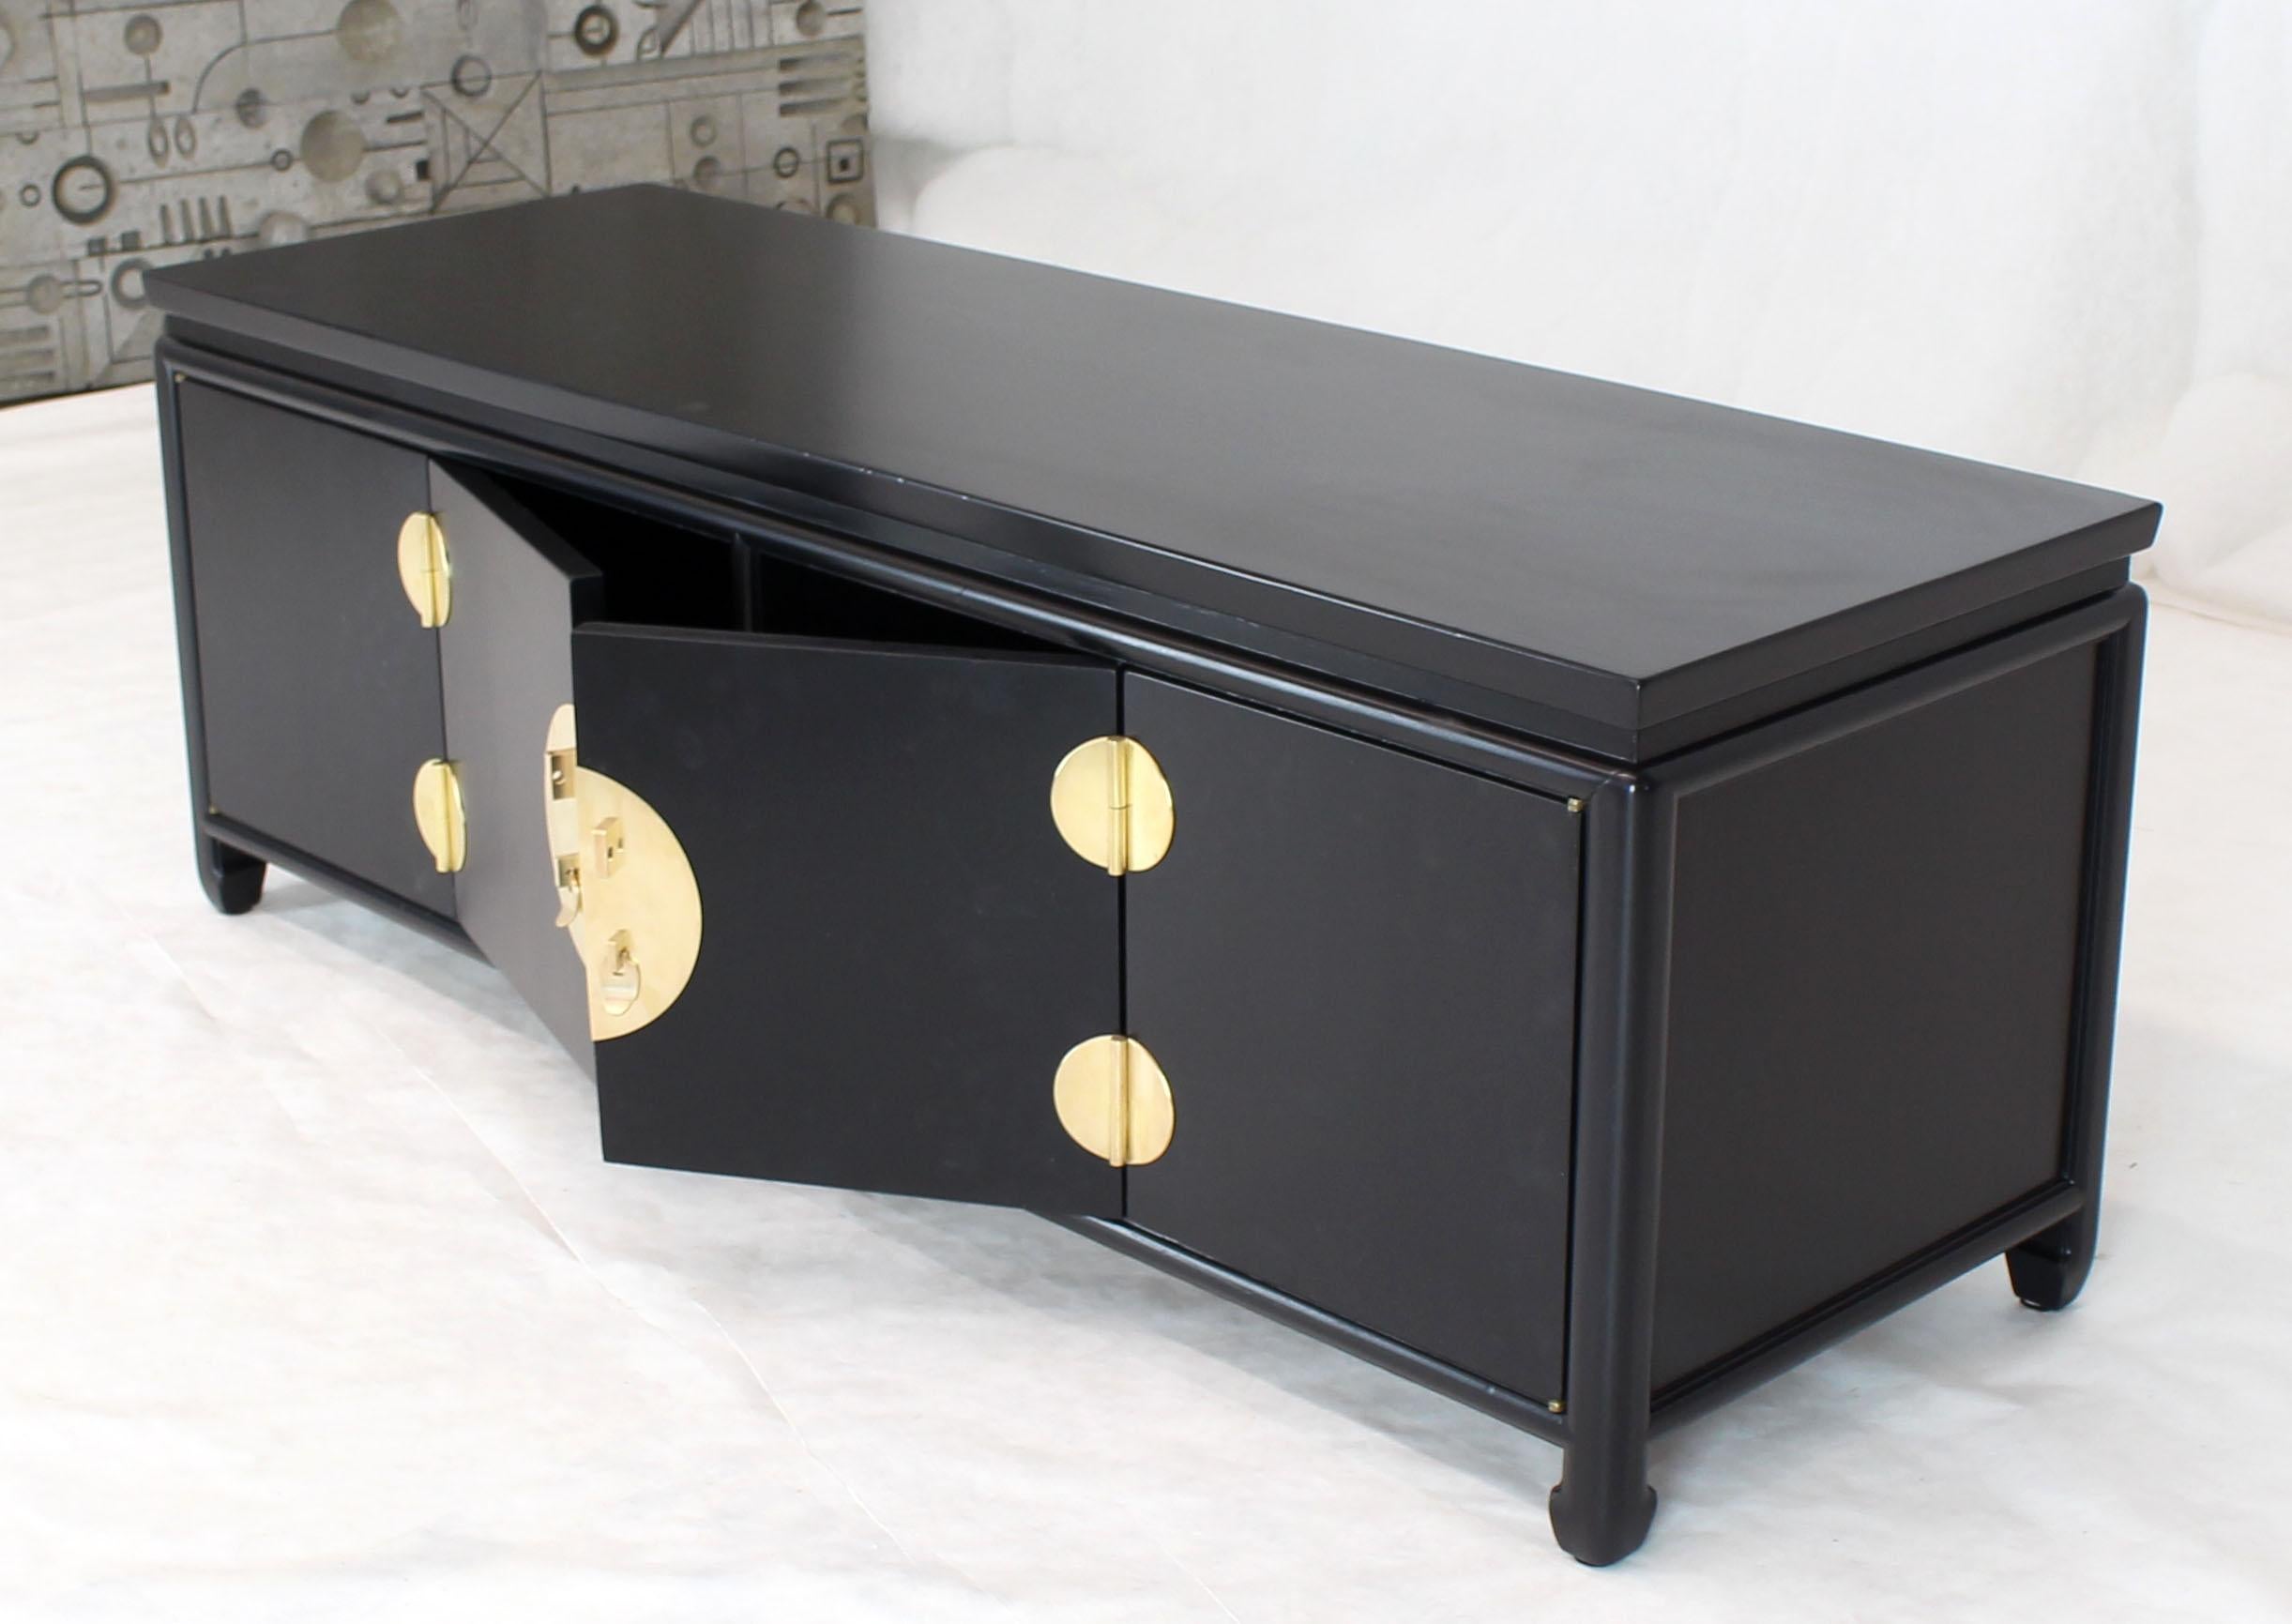 American Black Ebonized Low Petite Small Credenza Stand with Solid Brass Hardware Pulls For Sale